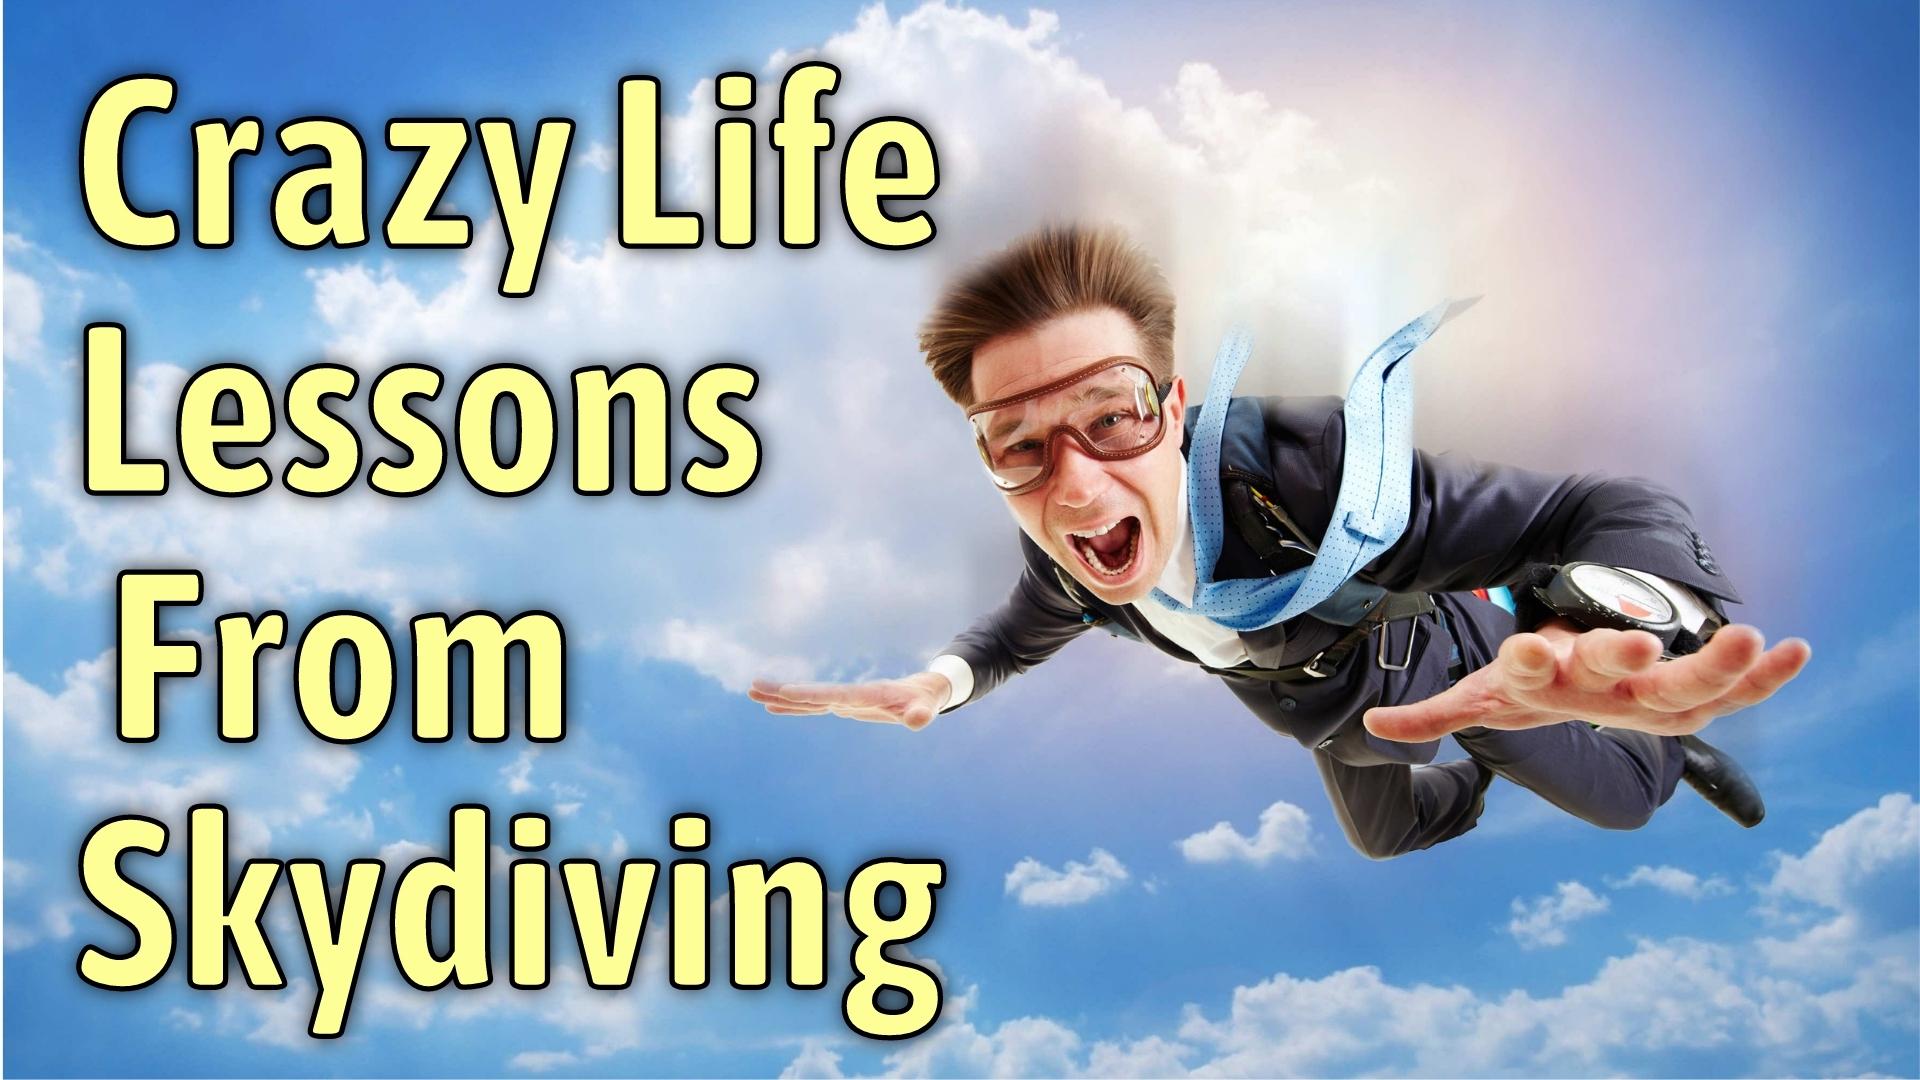 The Two Astounding Life-Changed Realizations You'll Learn From Skydiving